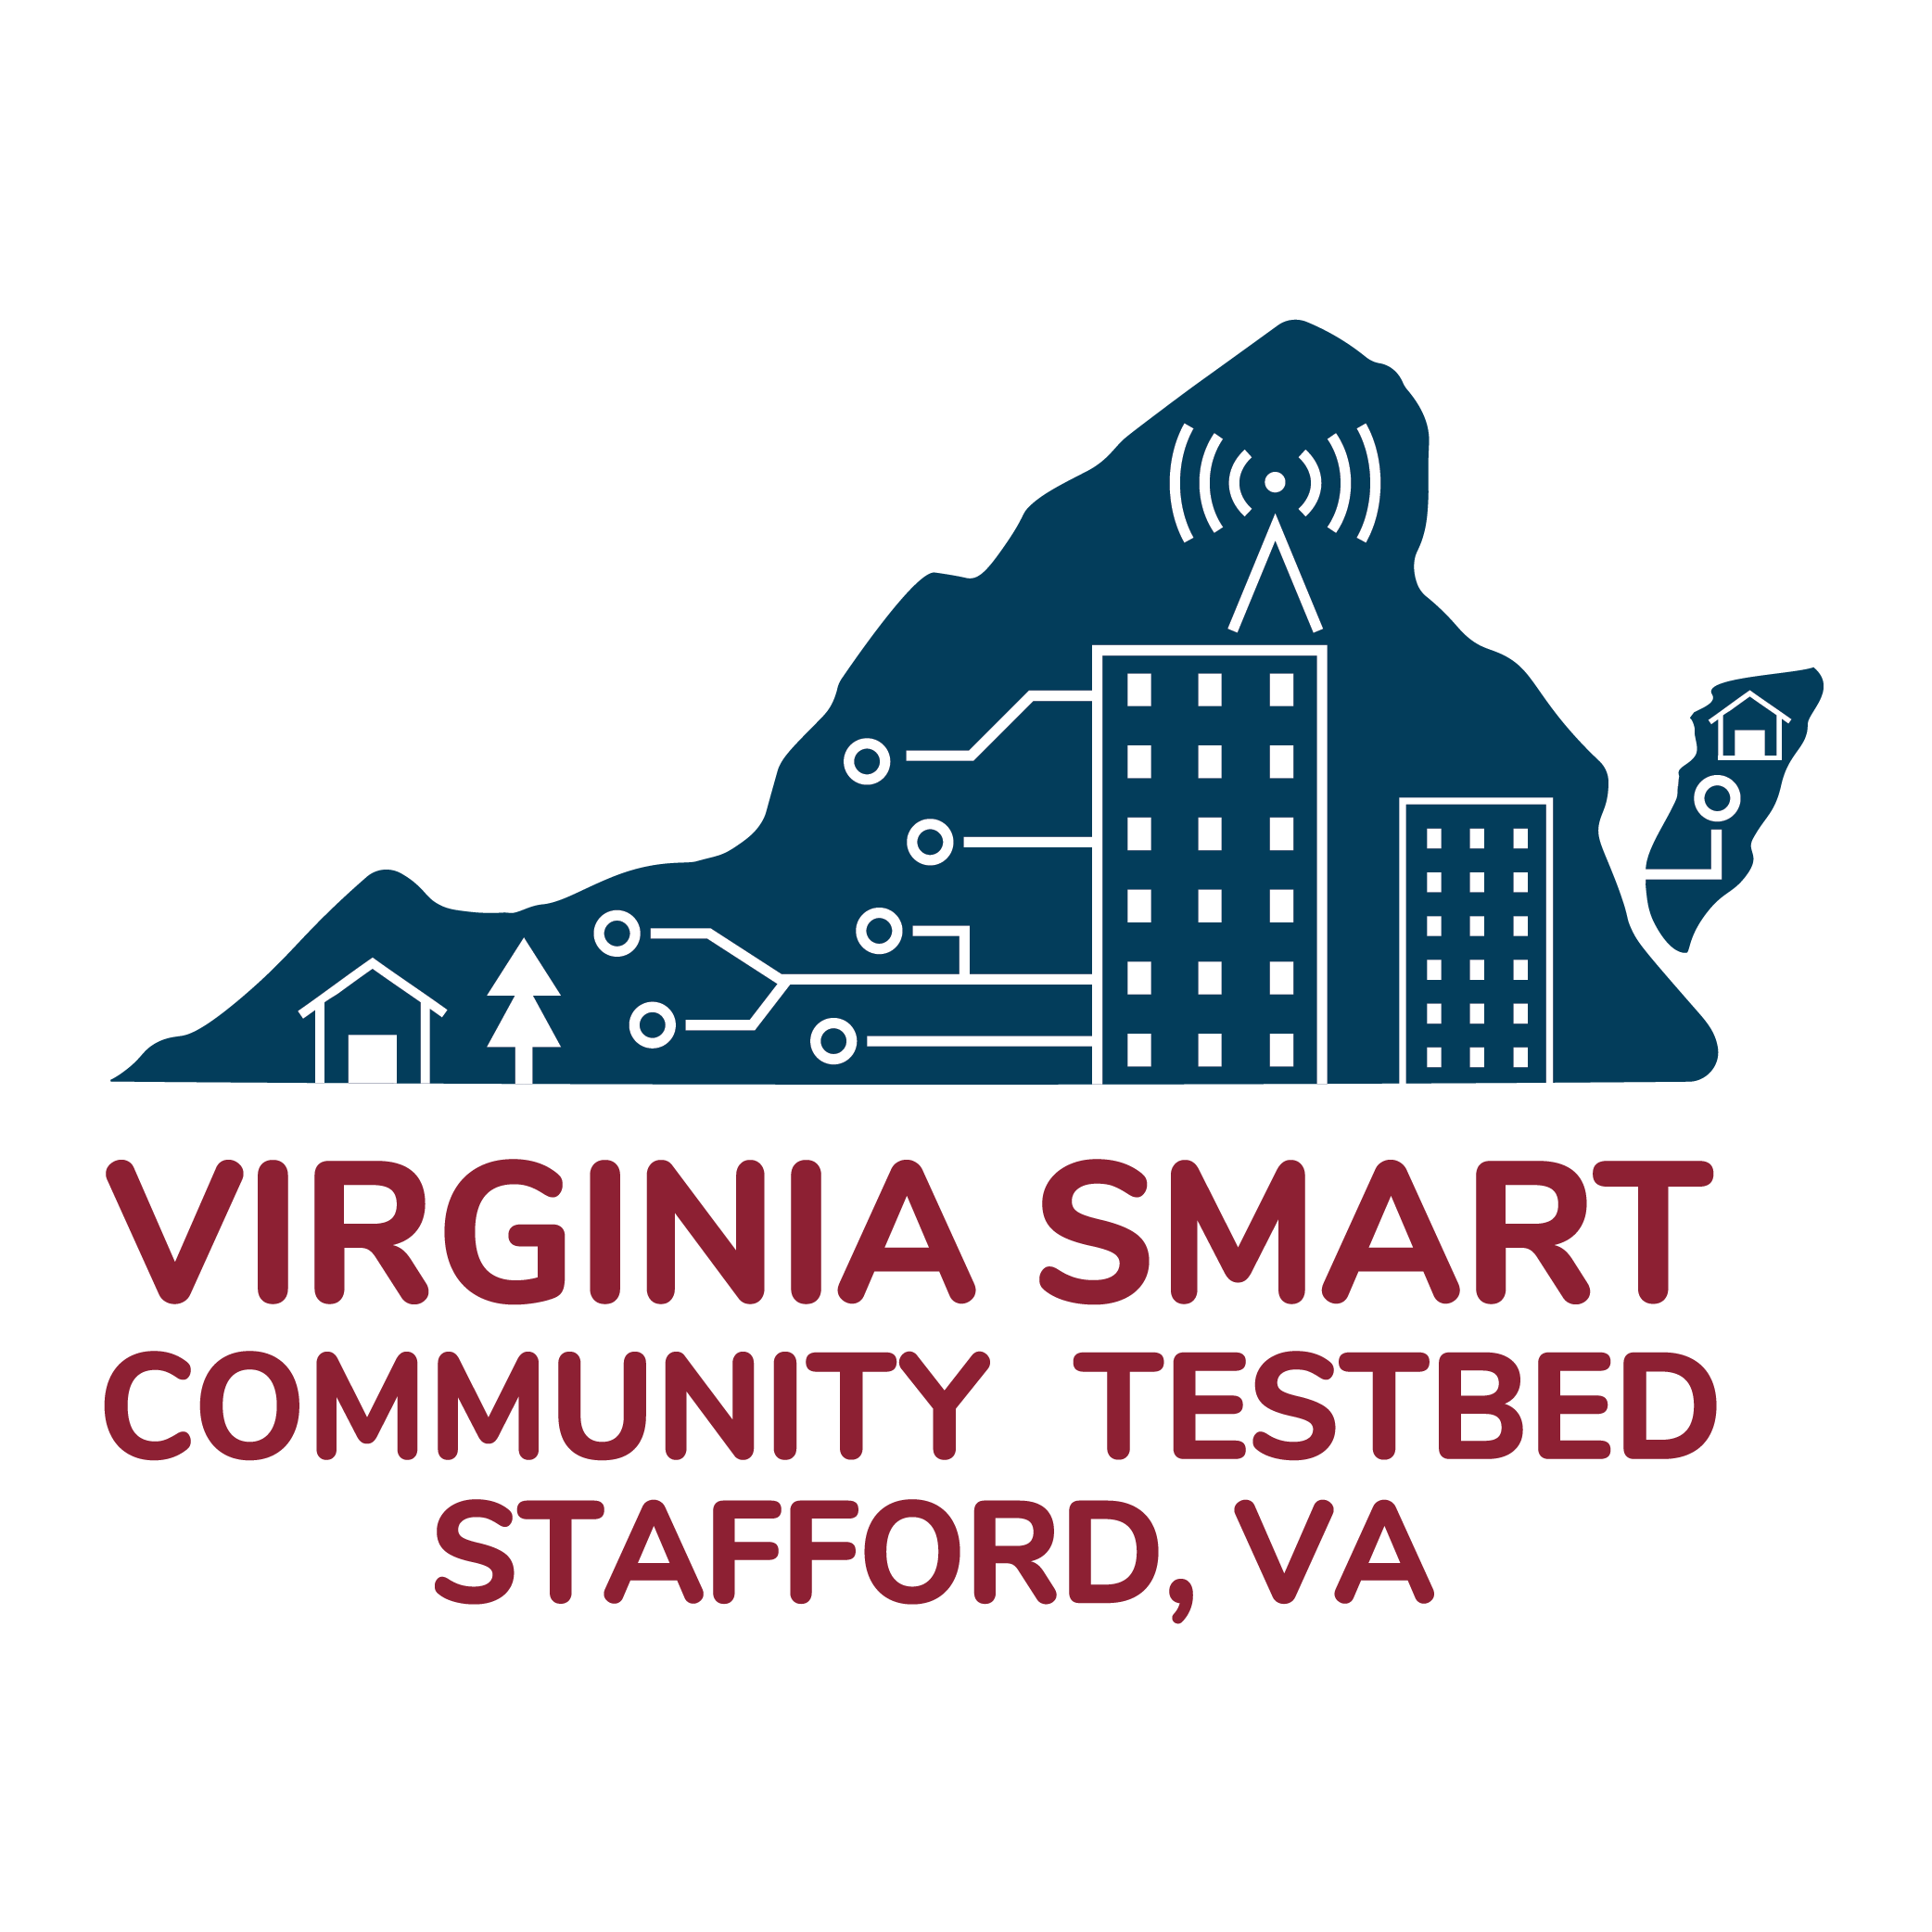 The Virginia Smart Community Testbed in Stafford VA Launches the first Broadband Connectivity Project in North America